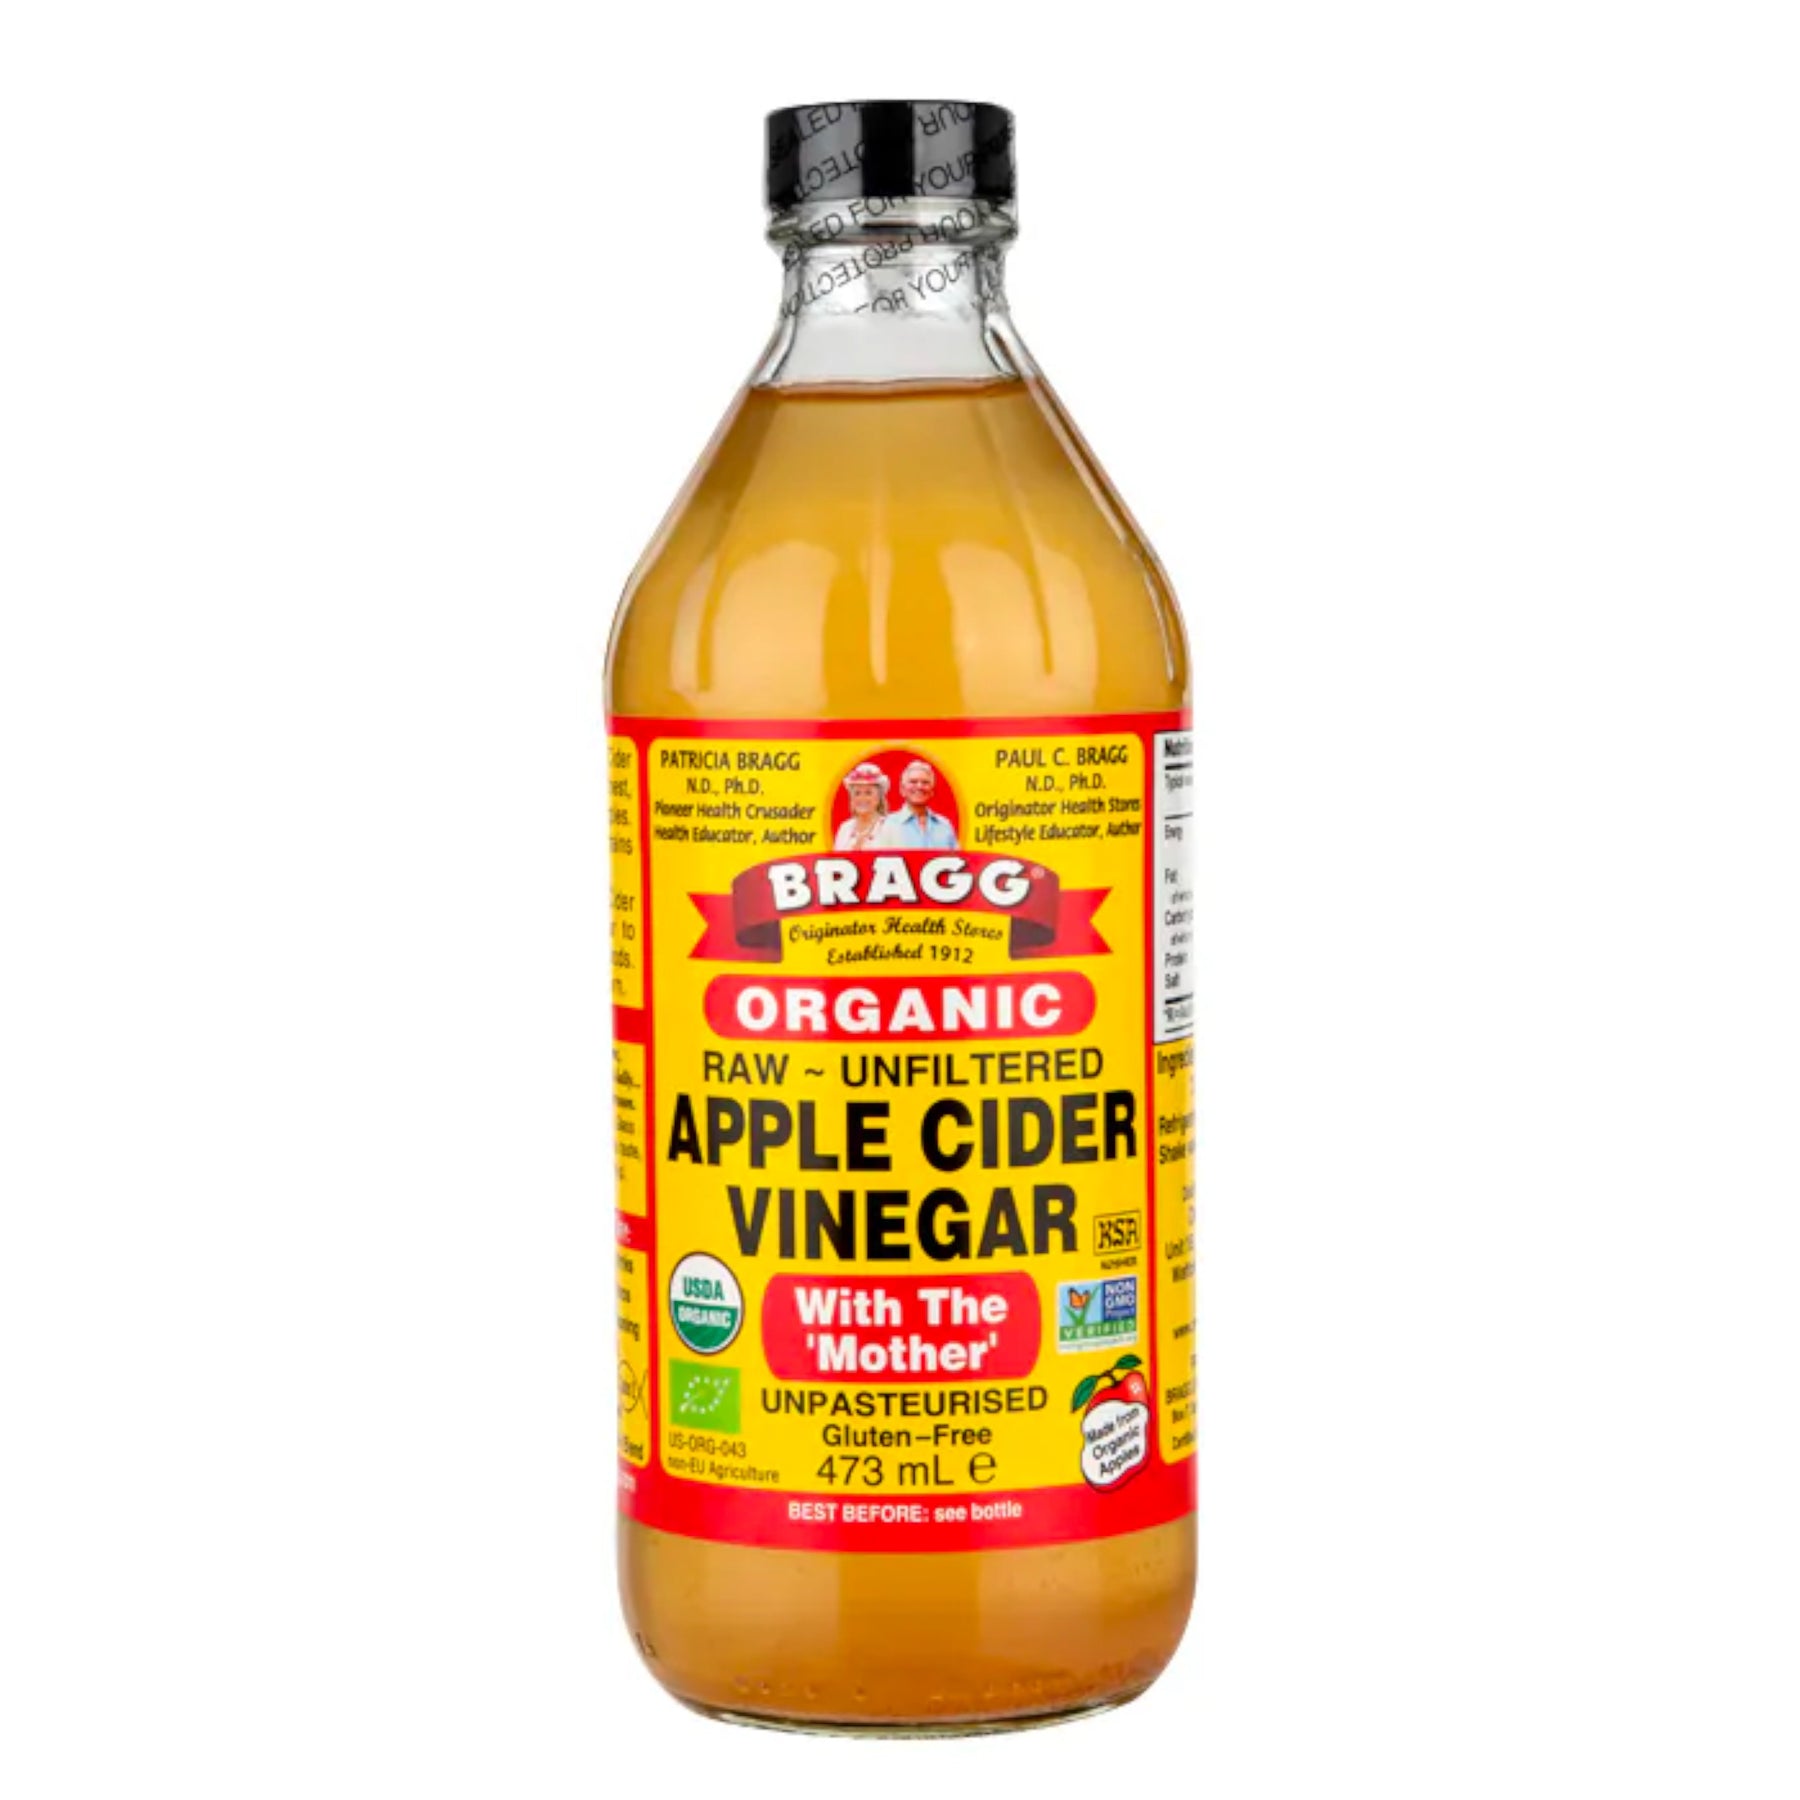 Bragg Organic Apple Cider Vinegar with The Mother